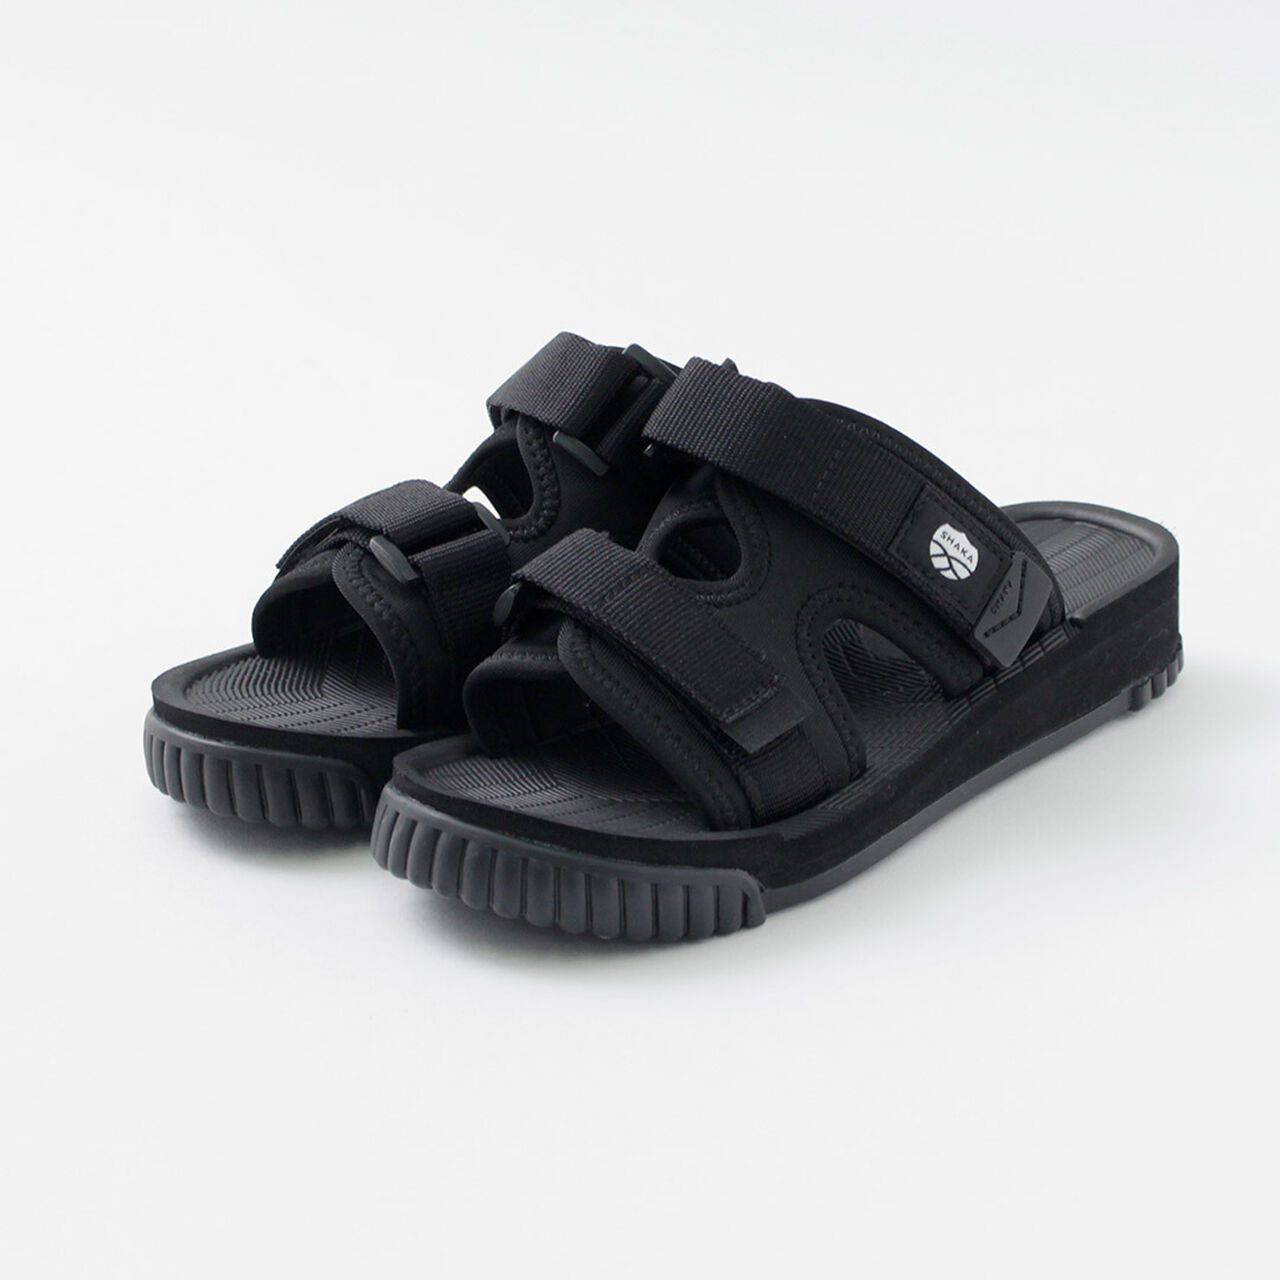 Chill Out Sandals,Black, large image number 0